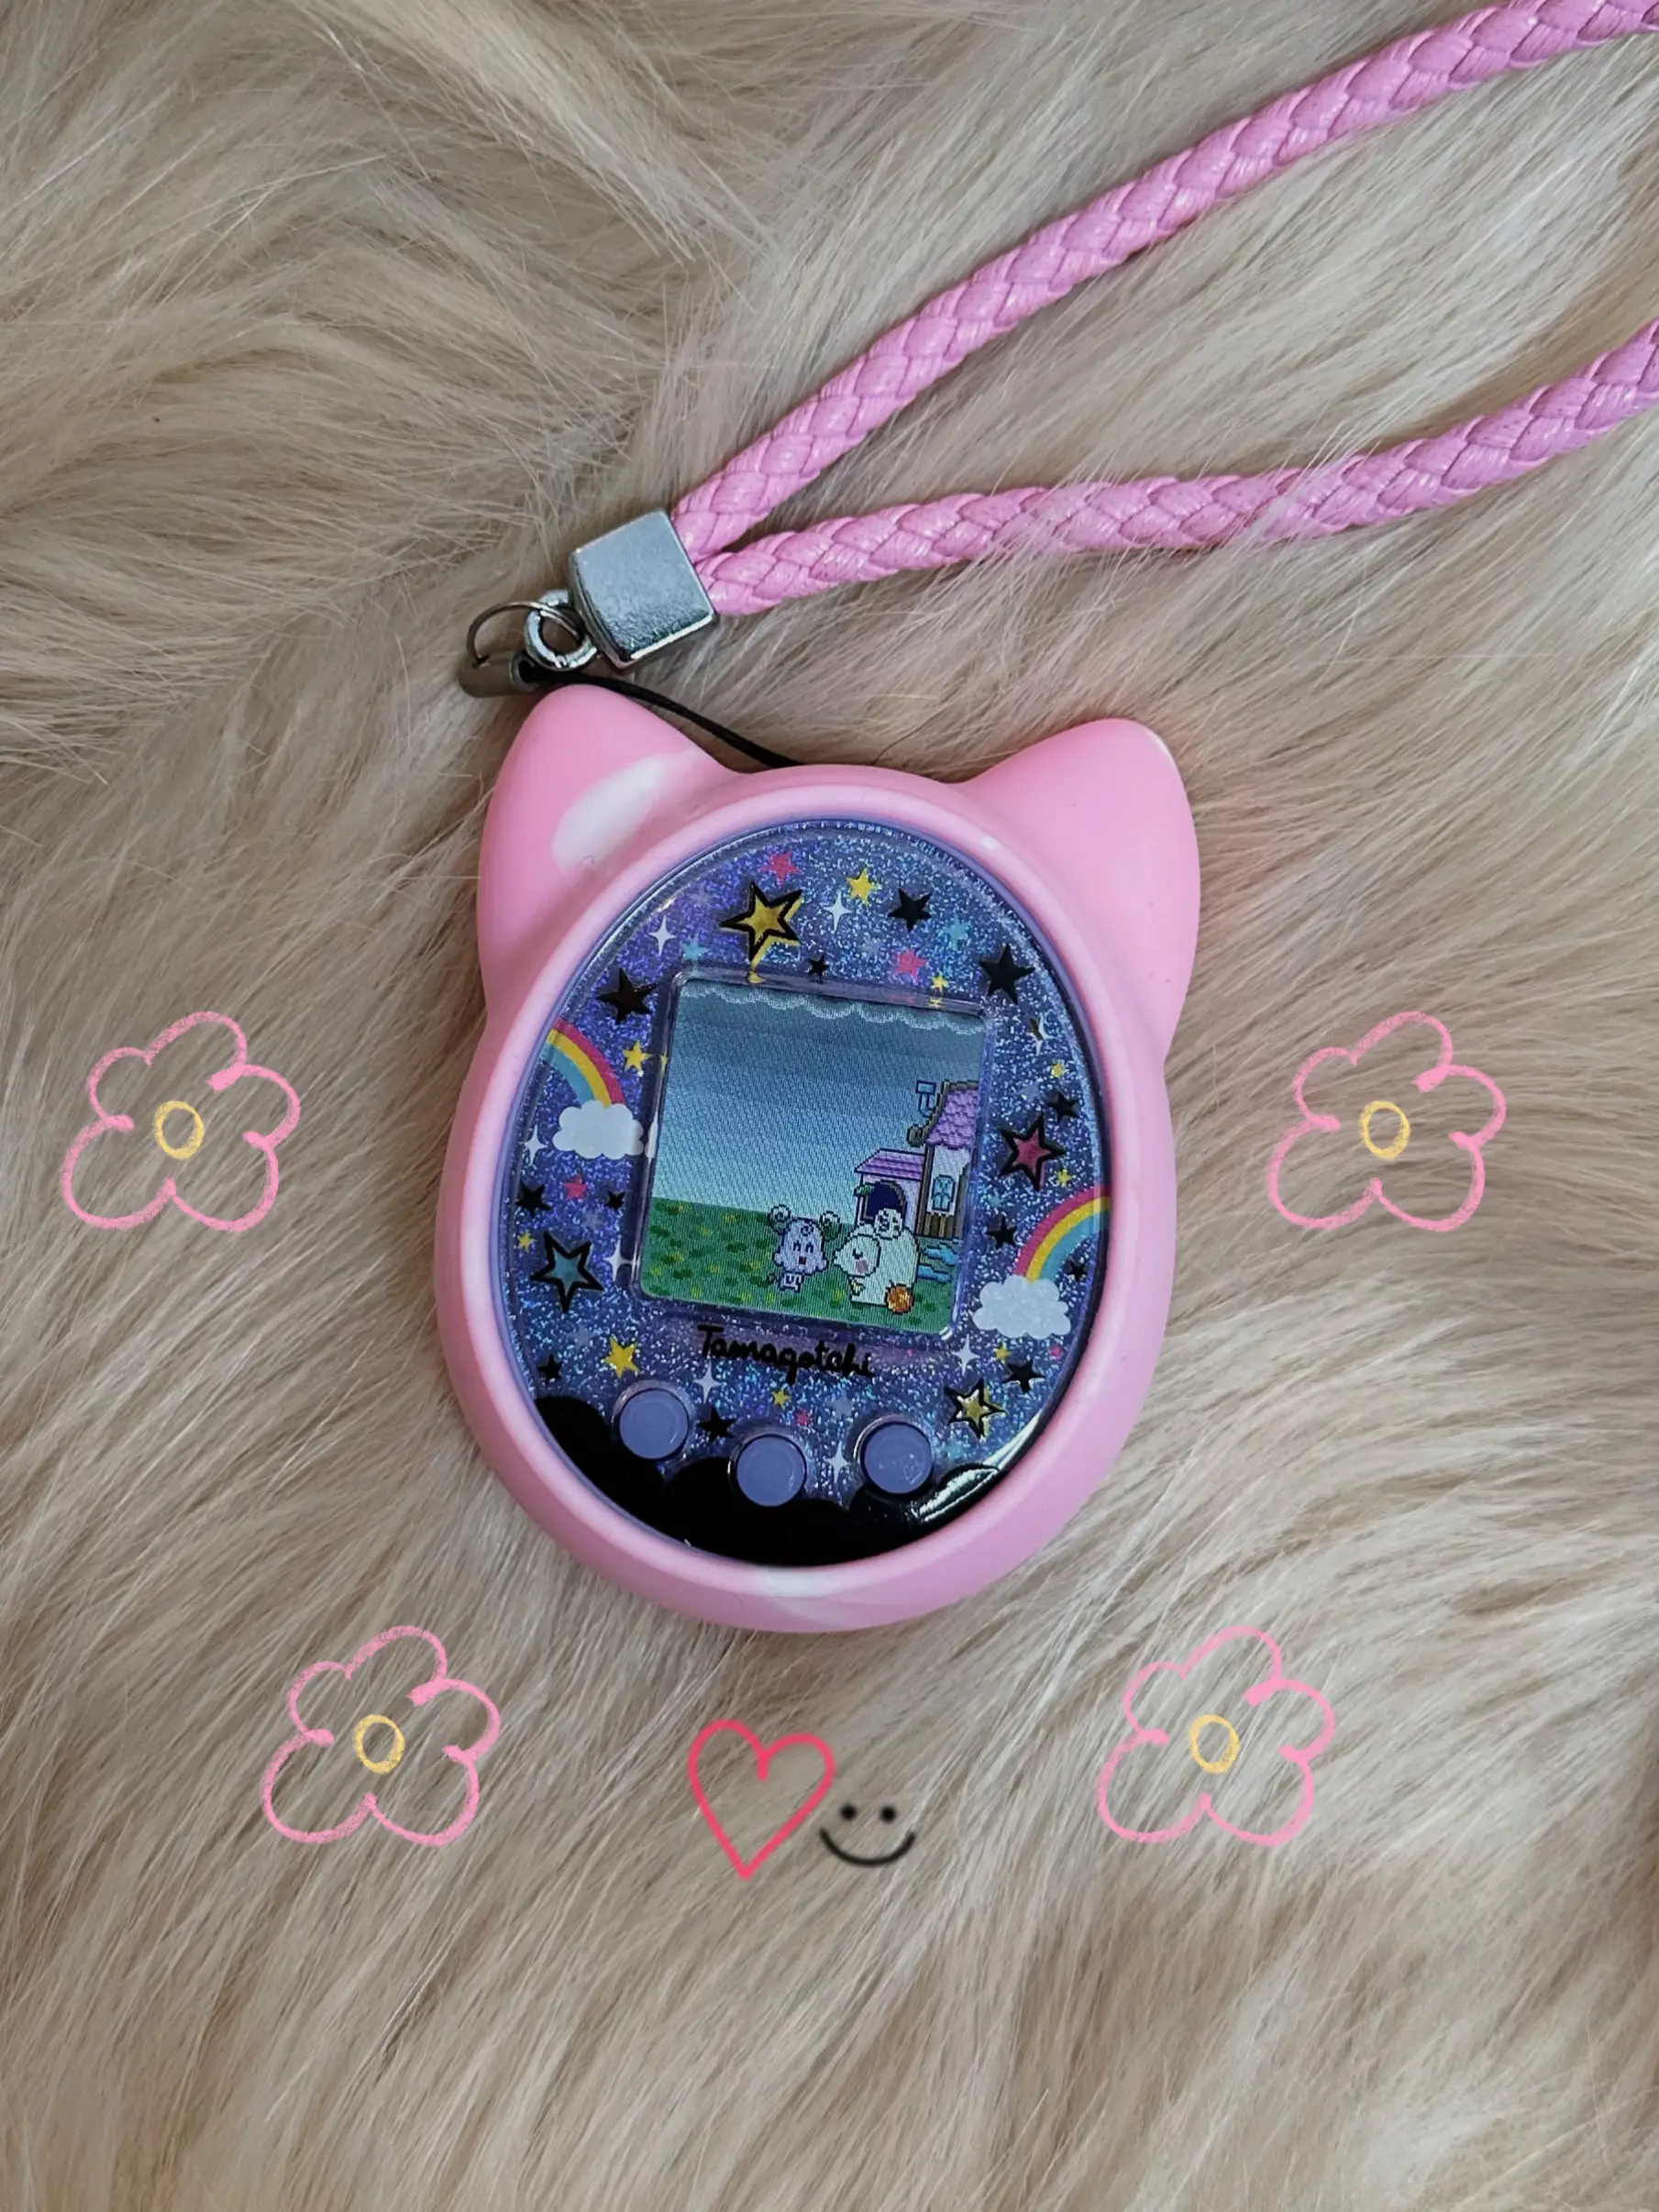 I finished the Bitzee so you don't have to! : r/tamagotchi